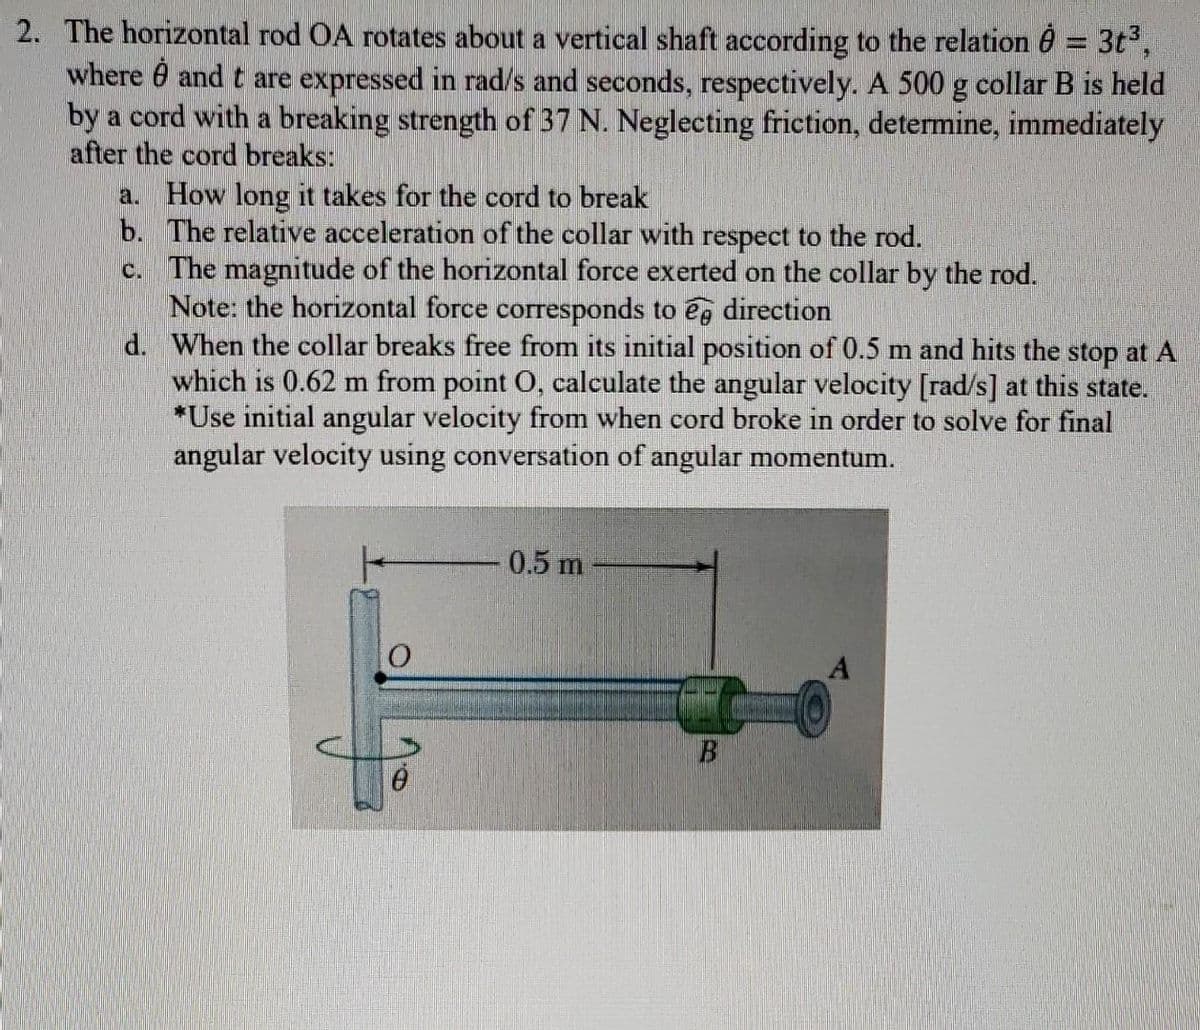 2. The horizontal rod OA rotates about a vertical shaft according to the relation 6 = 3t°,
where 0 and t are expressed in rad/s and seconds, respectively. A 500 g collar B is held
by a cord with a breaking strength of 37 N. Neglecting friction, determine, immediately
after the cord breaks:
a. How long it takes for the cord to break
b. The relative acceleration of the collar with respect to the rod.
c. The magnitude of the horizontal force exerted on the collar by the rod.
Note: the horizontal force corresponds to ég direction
d. When the collar breaks free from its initial position of 0.5 m and hits the stop at A
which is 0.62 m from point O, calculate the angular velocity [rad/s] at this state.
*Use initial angular velocity from when cord broke in order to solve for final
angular velocity using conversation of angular momentum.
0.5 m
